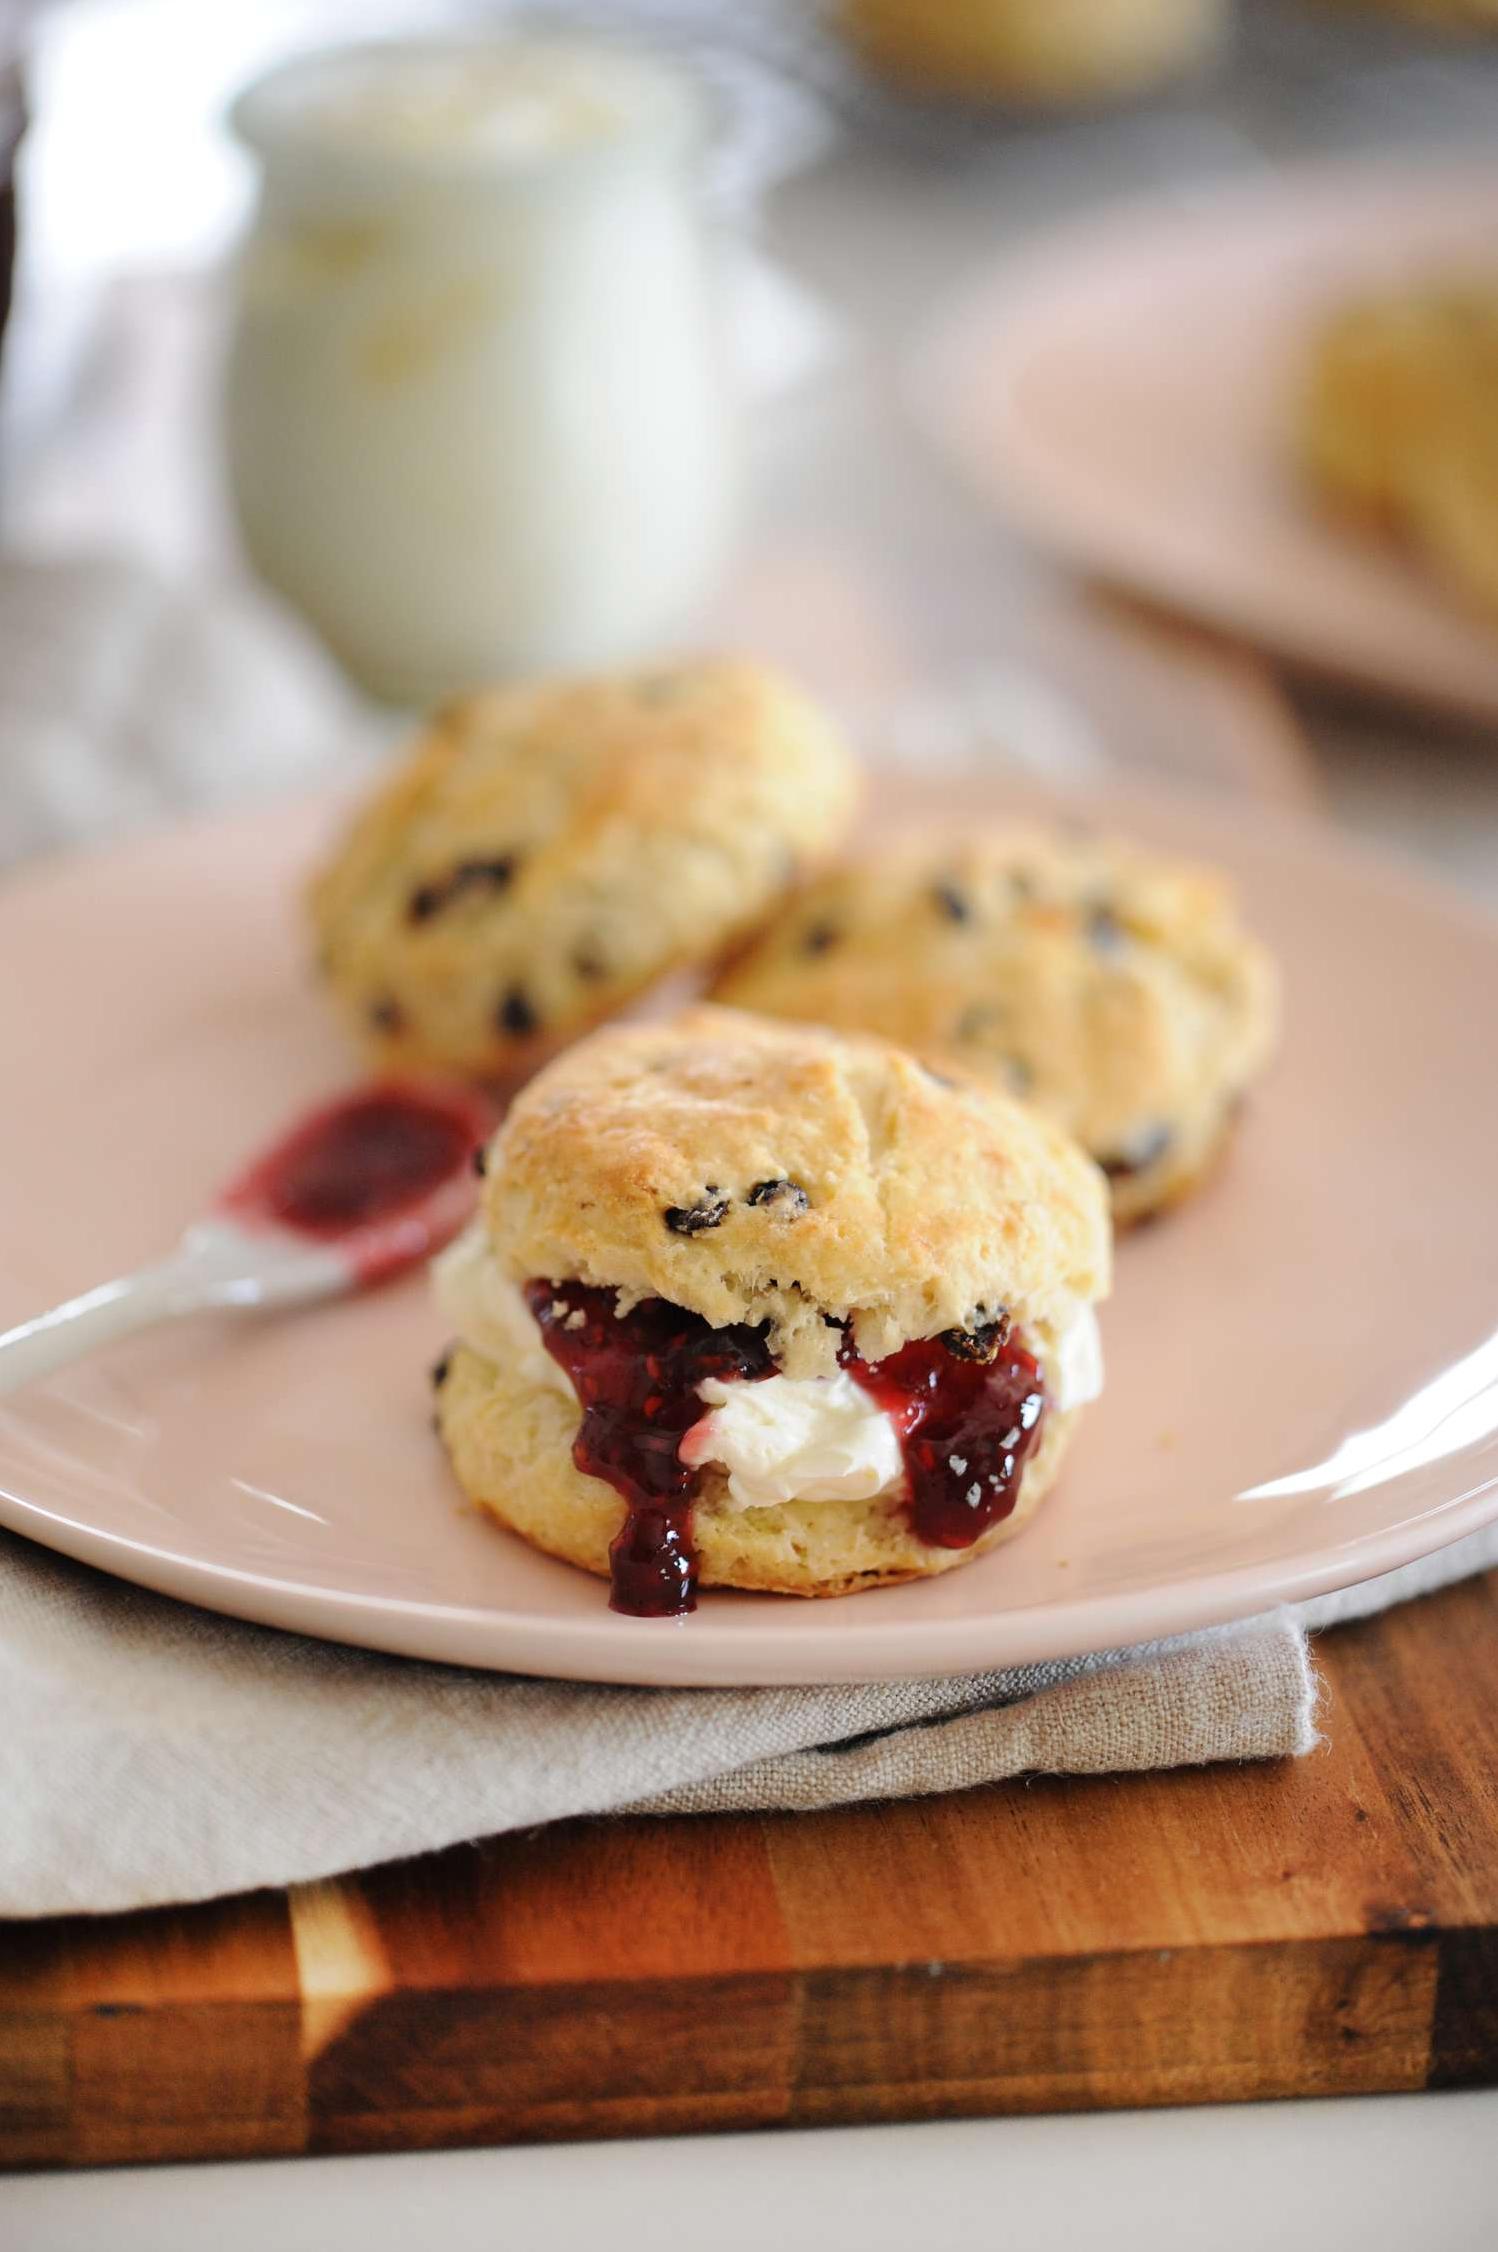  The smell of fresh-baked scone is the best way to start your day.